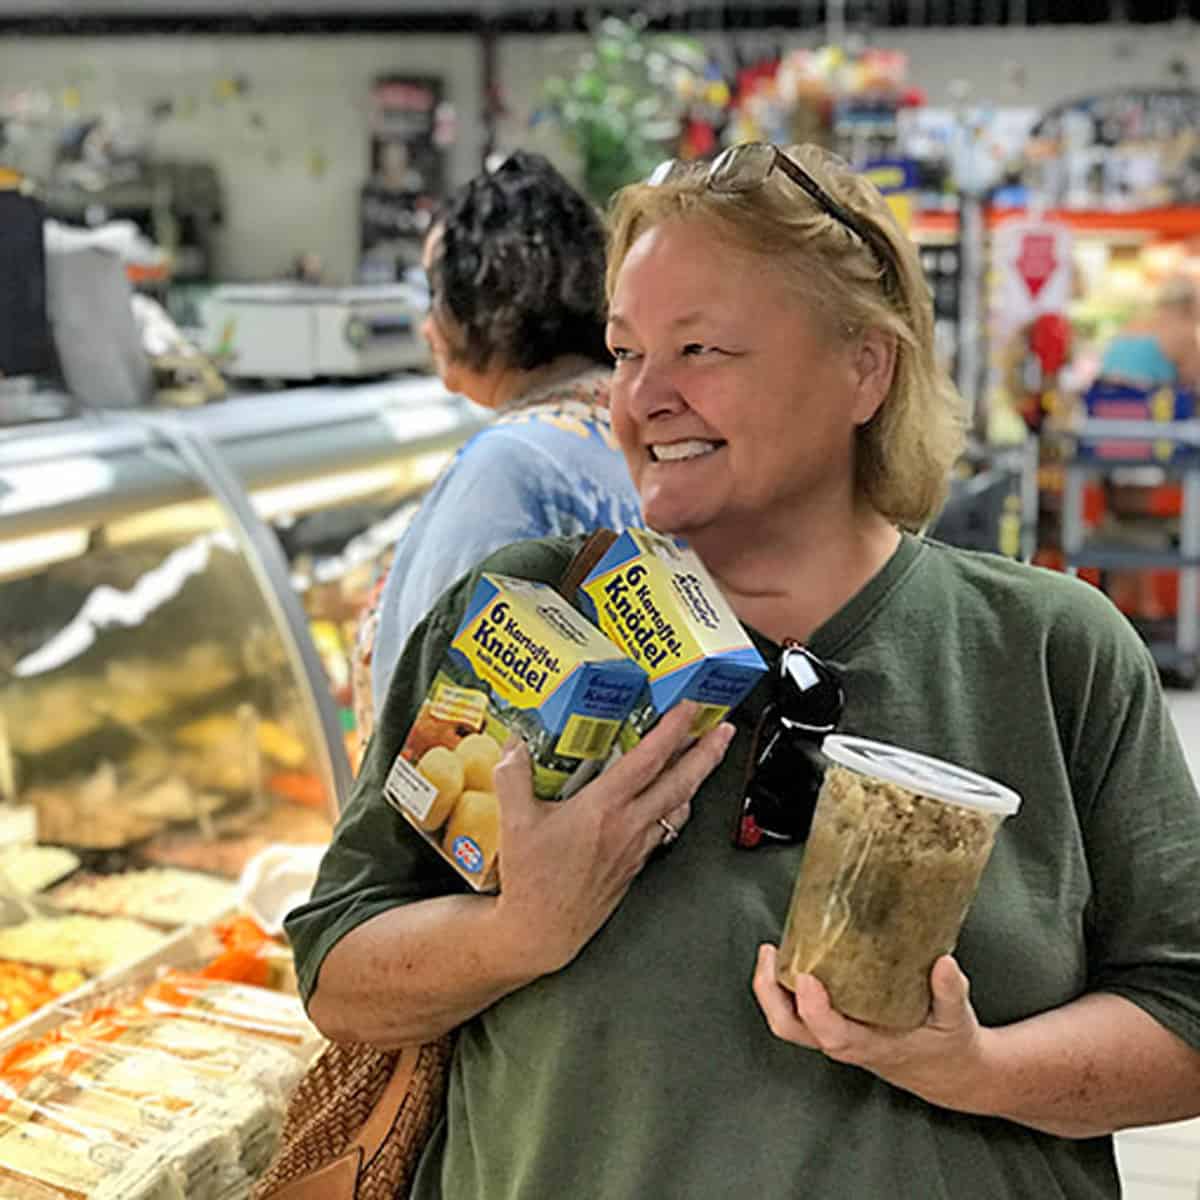 A woman in a grocery store.